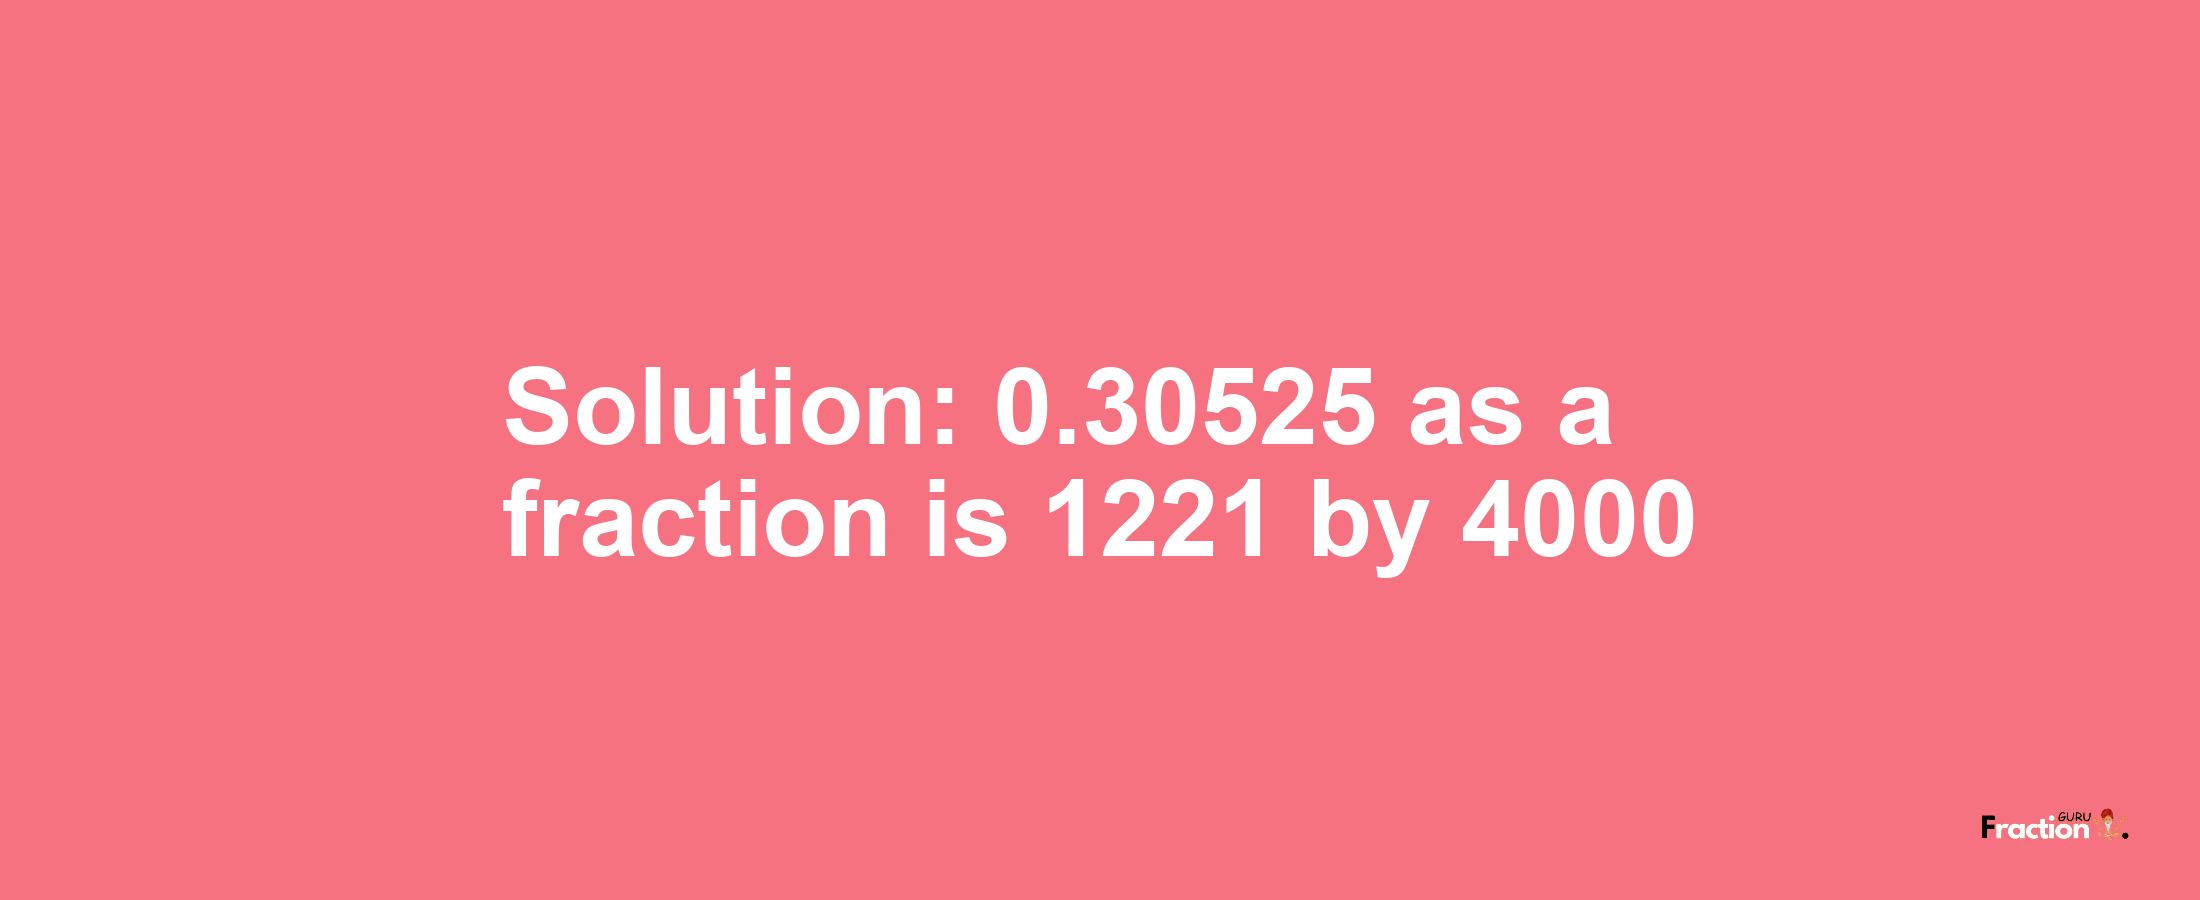 Solution:0.30525 as a fraction is 1221/4000